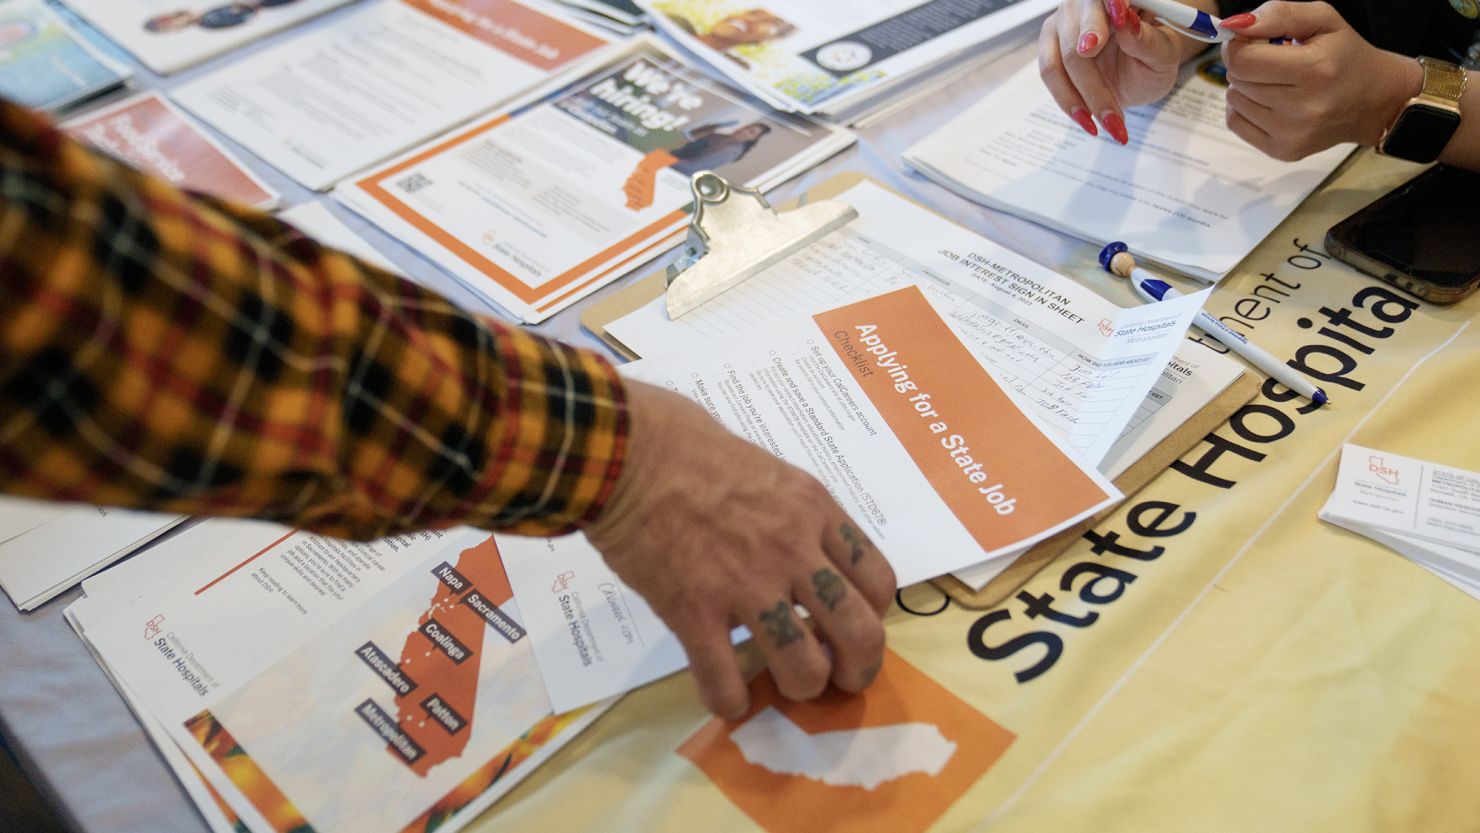 Job seekers attend a Veteran Employment and Resource Fair in Long Beach, California, on January 9.